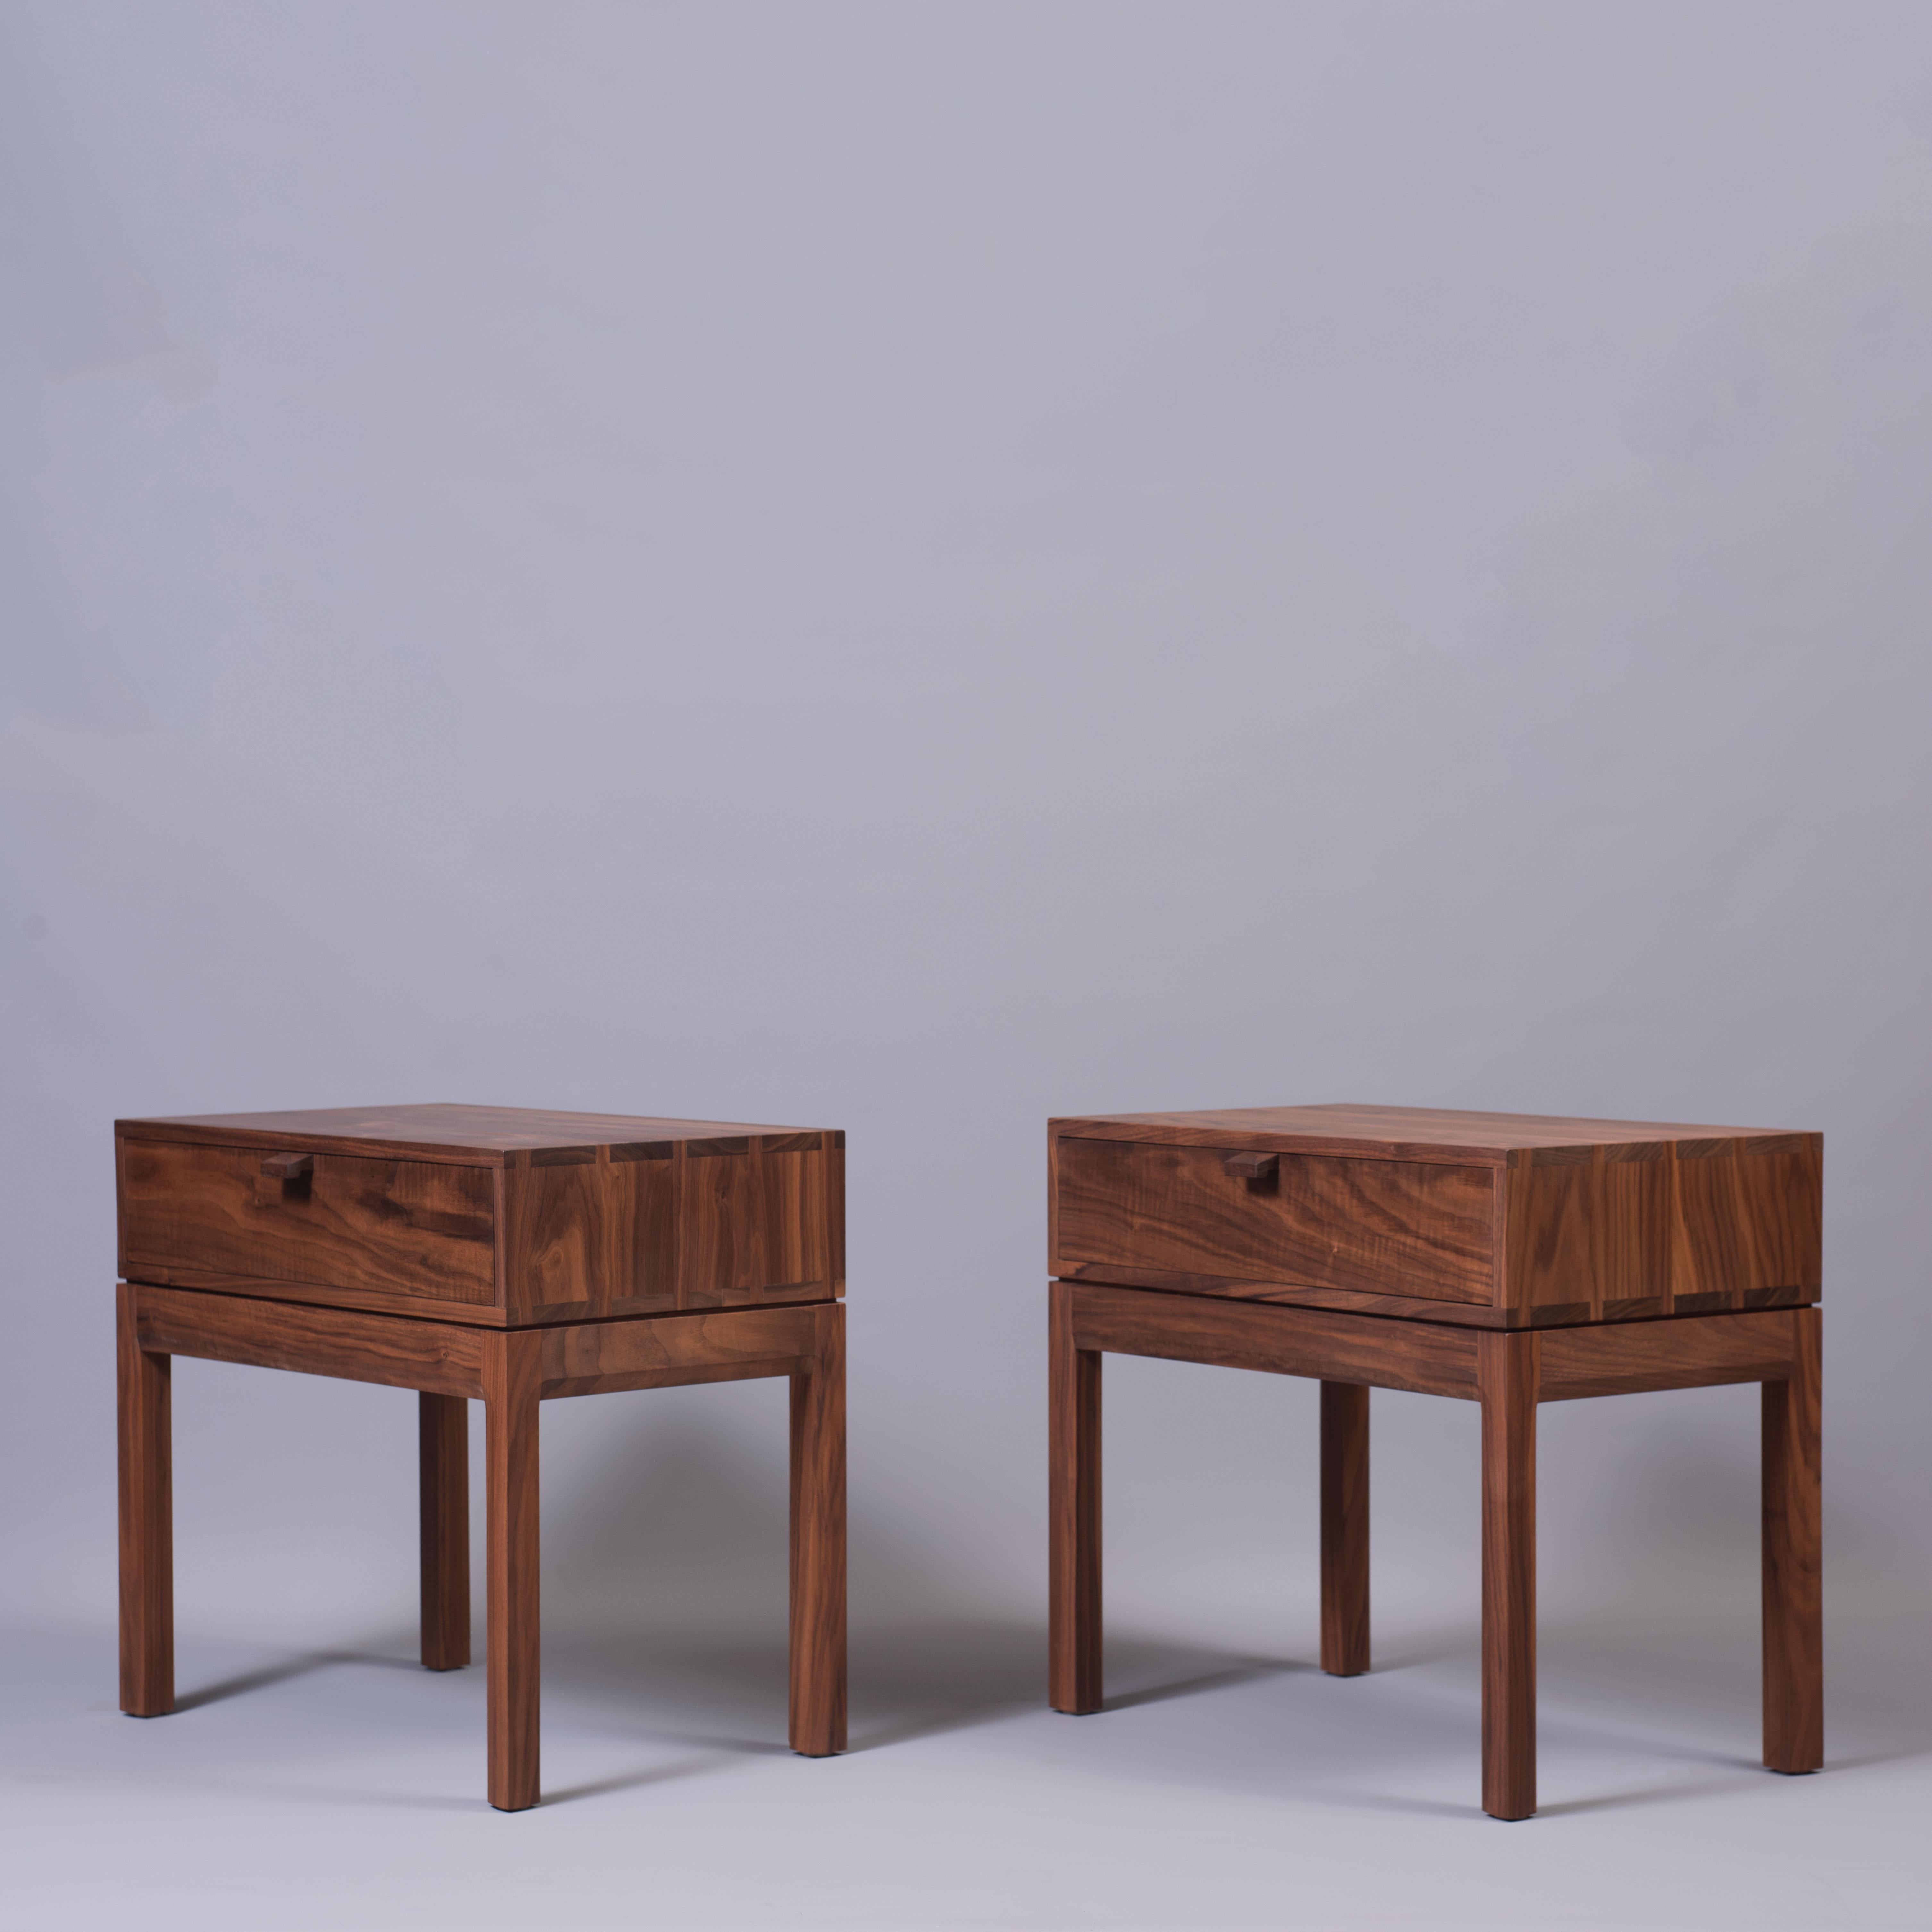 A pair of walnut hand-crafted nightstands in the midcentury style. Constructed from finest American black walnut with the inner dovetailed jointed drawer carcass in English Oak. The upper box is detailed with hand-cut dovetail jointing. A light